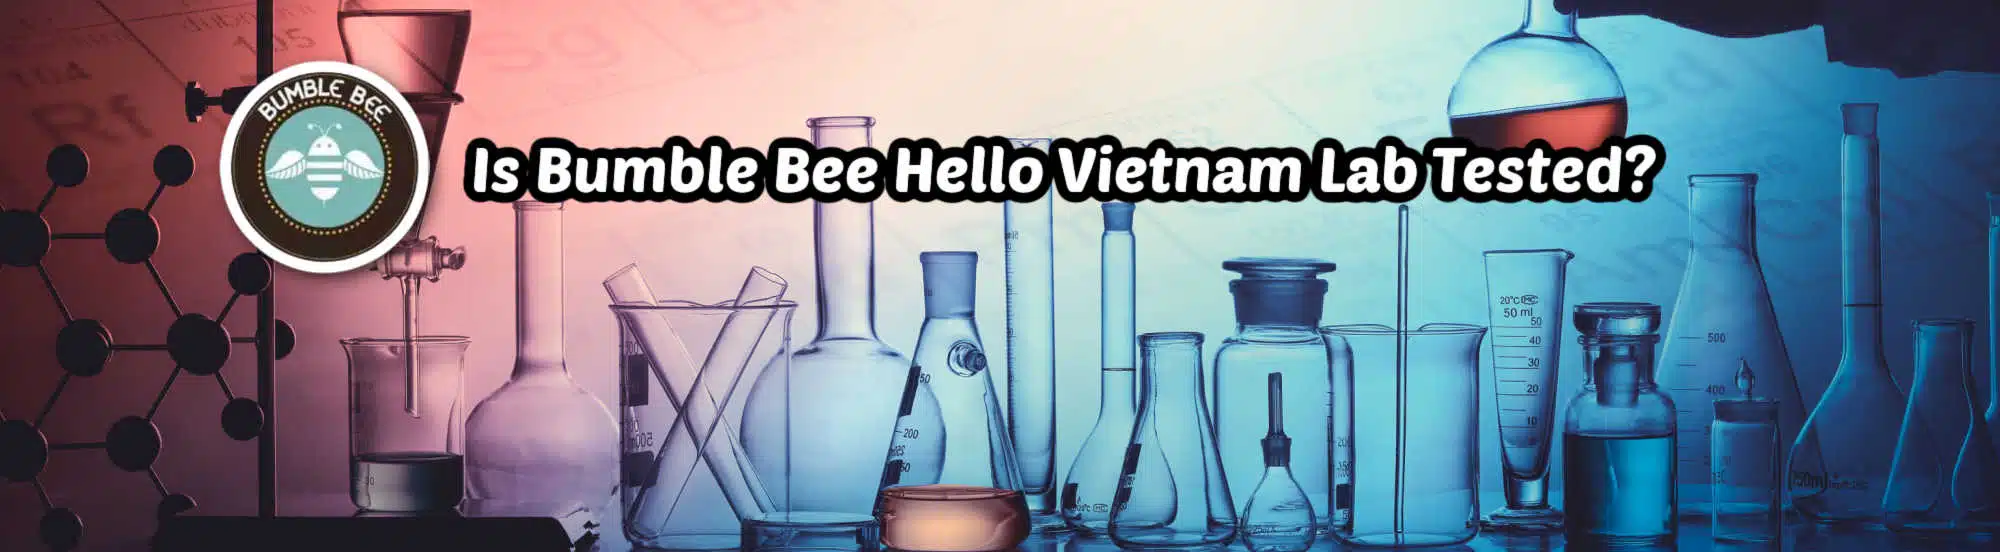 image of is bumble bee vietnam kratom lab tested